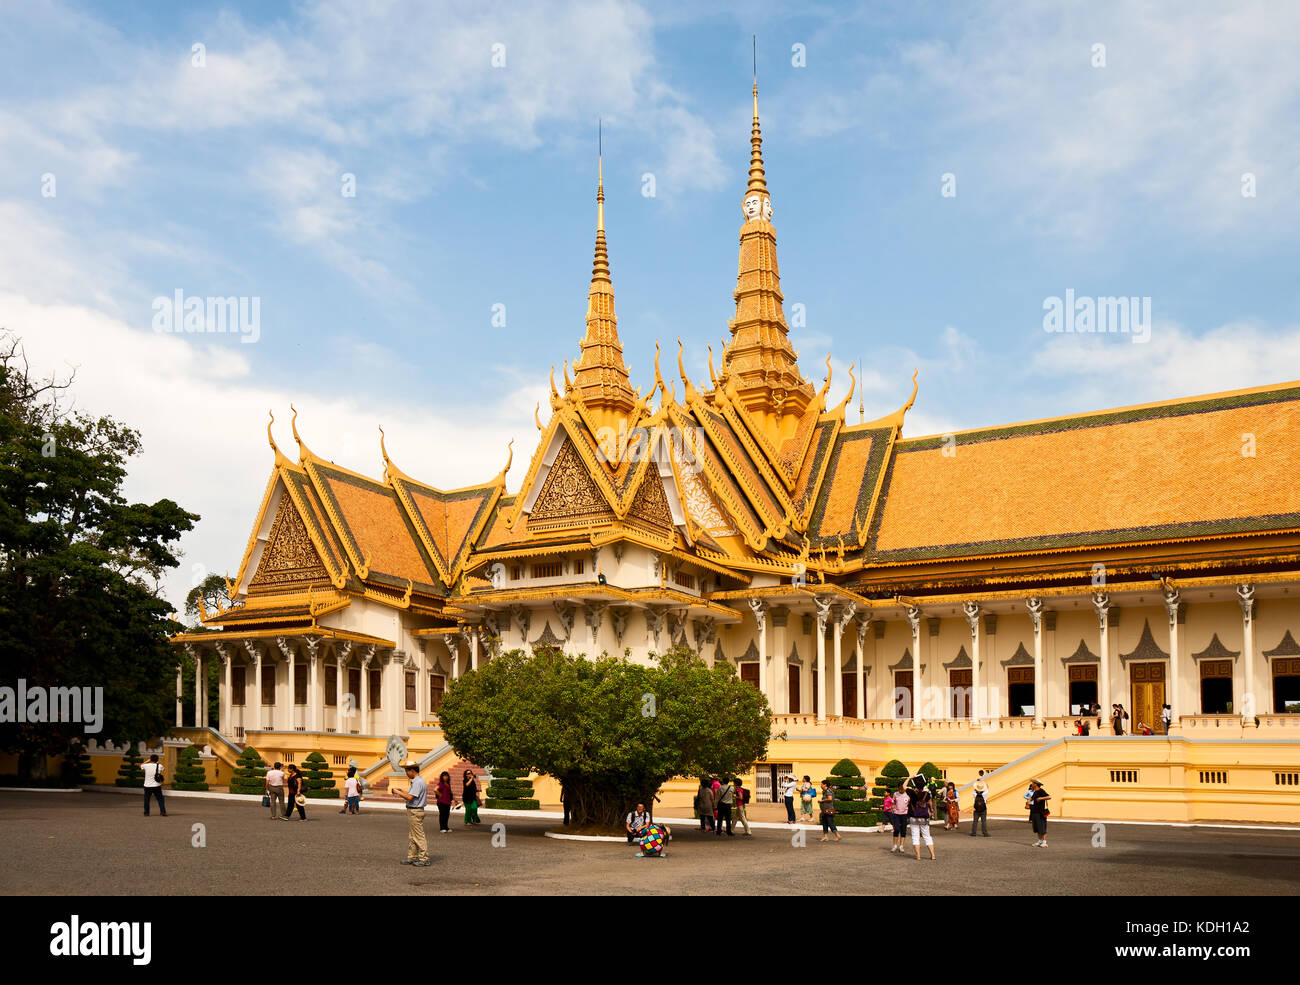 PHNOM PENH, CAMBODIA - FEBRUARY 21, 2013 - The Throne Hall of Royal Palace in Phnom Penh. Tourists visiting the Royal Palace in Phnom Penh. Stock Photo